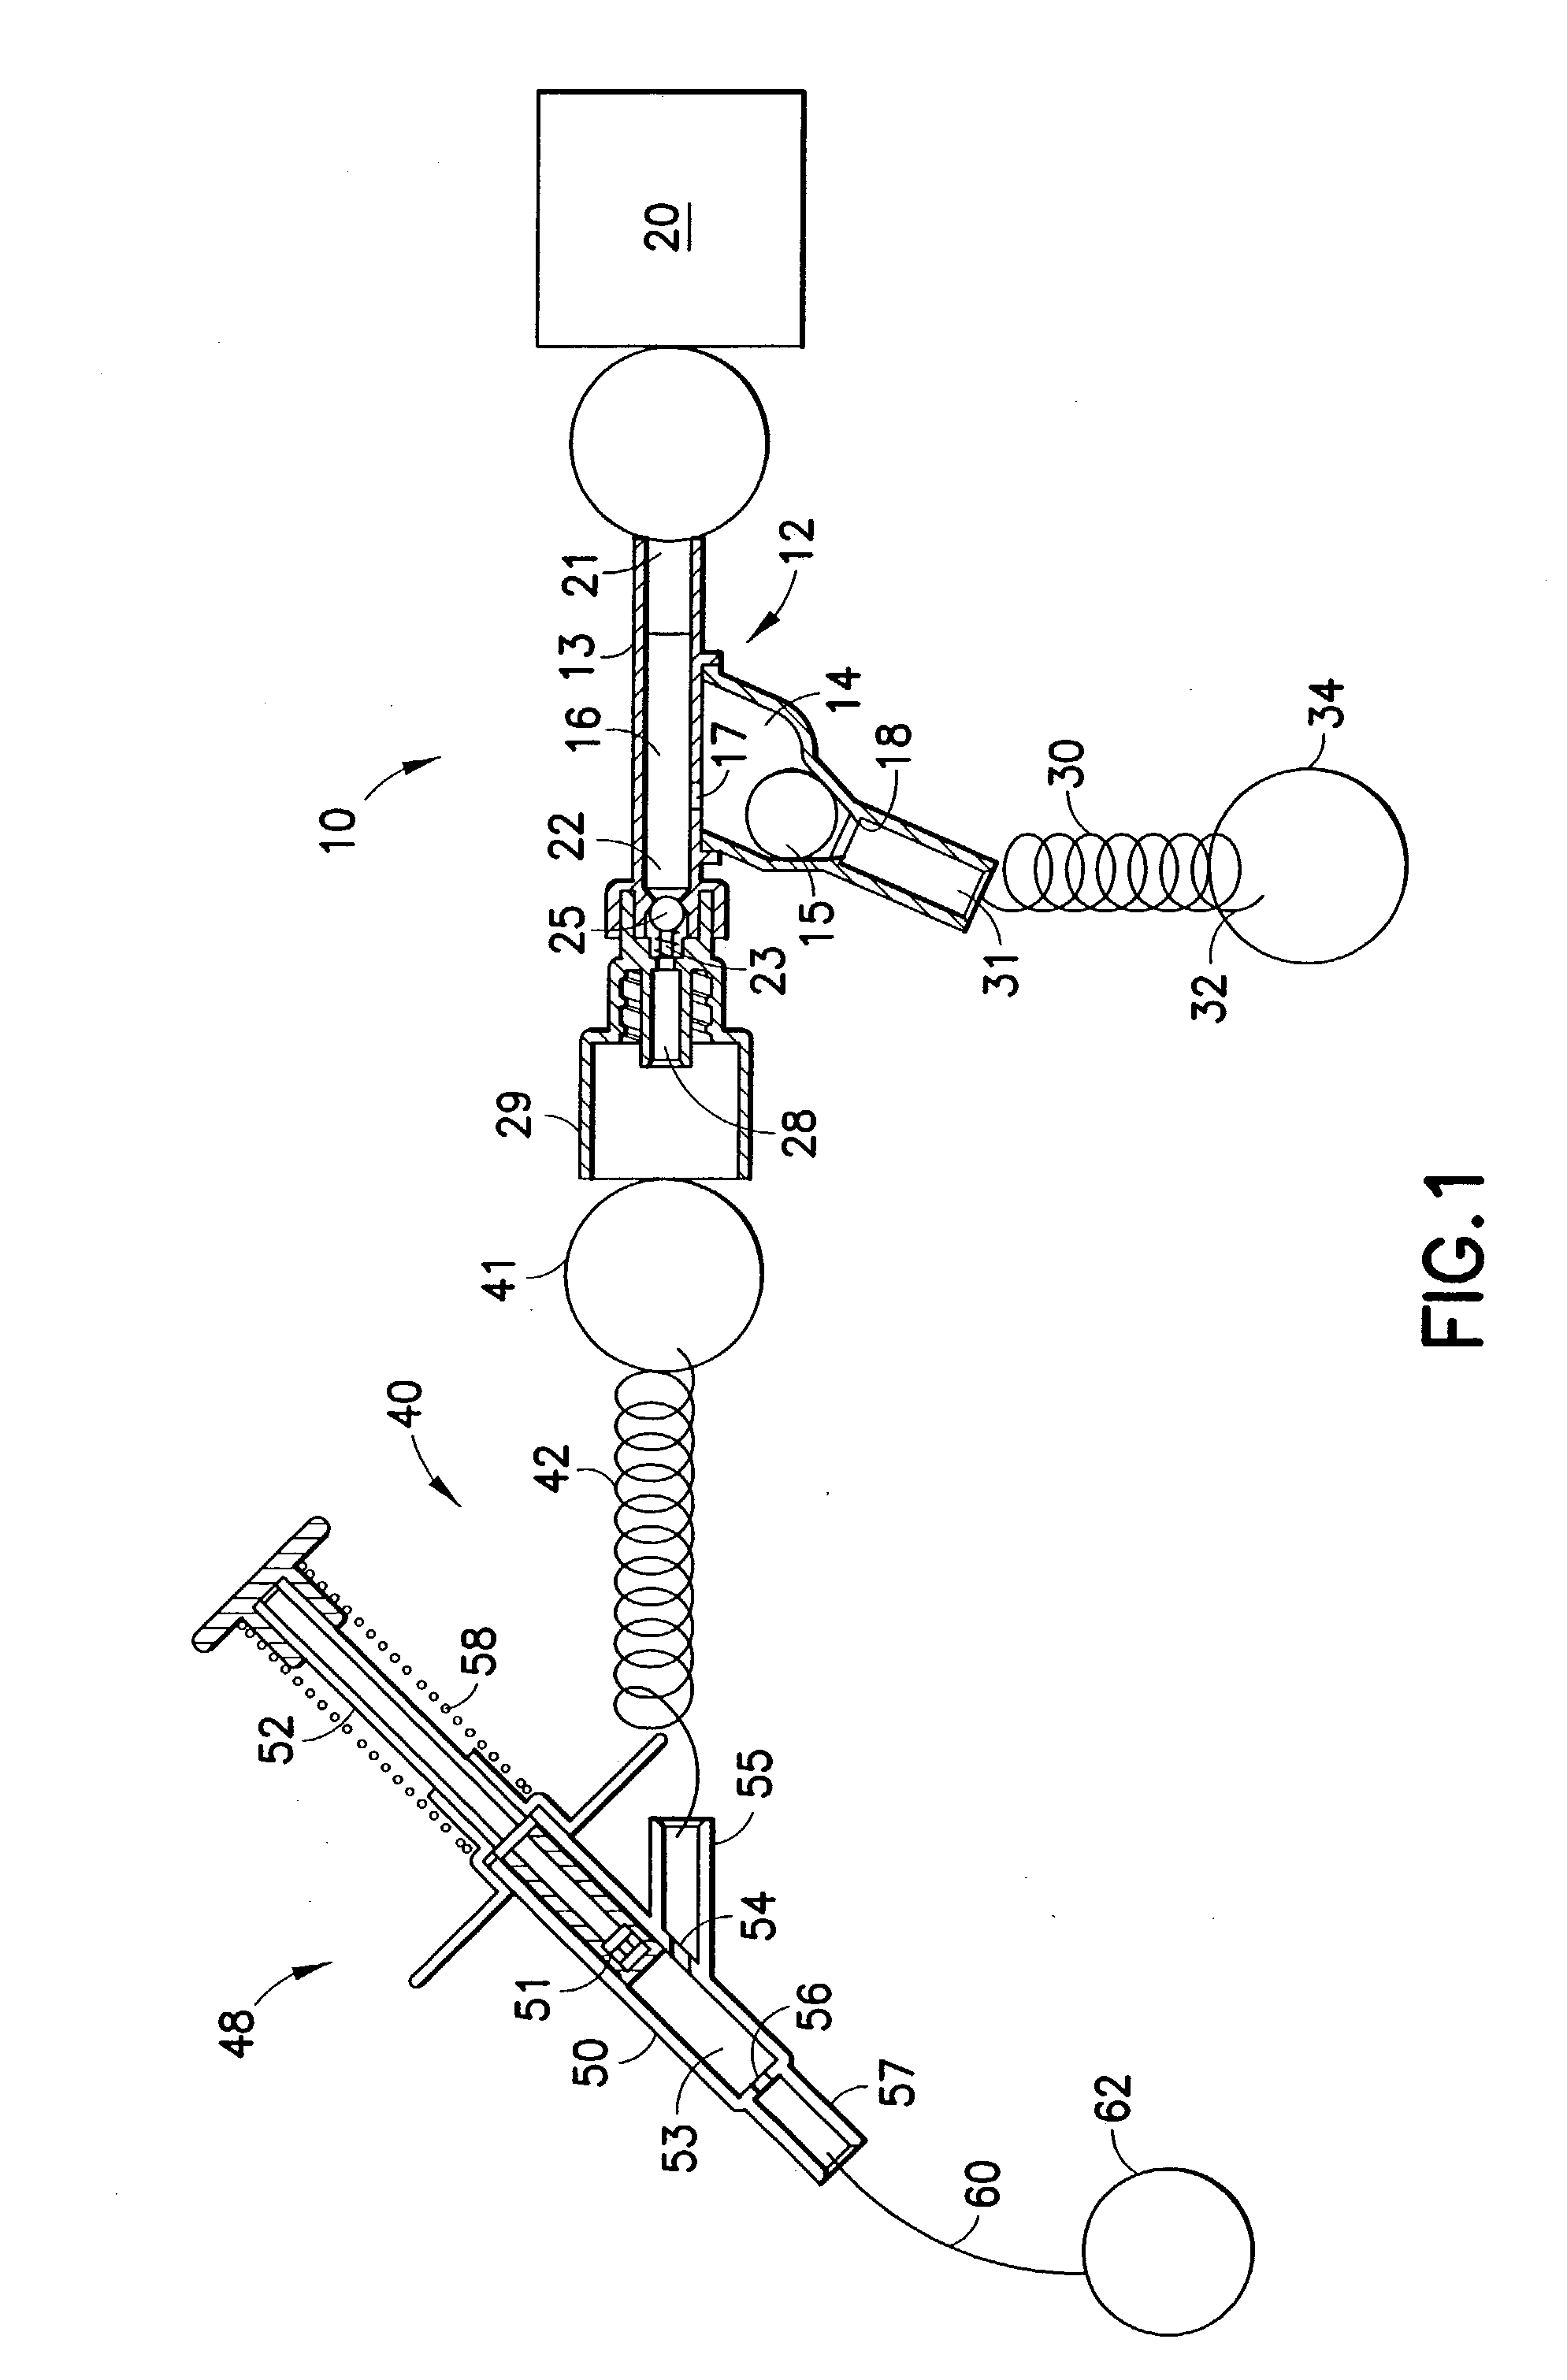 Method and apparatus for the delivery of contrast fluid to a patient